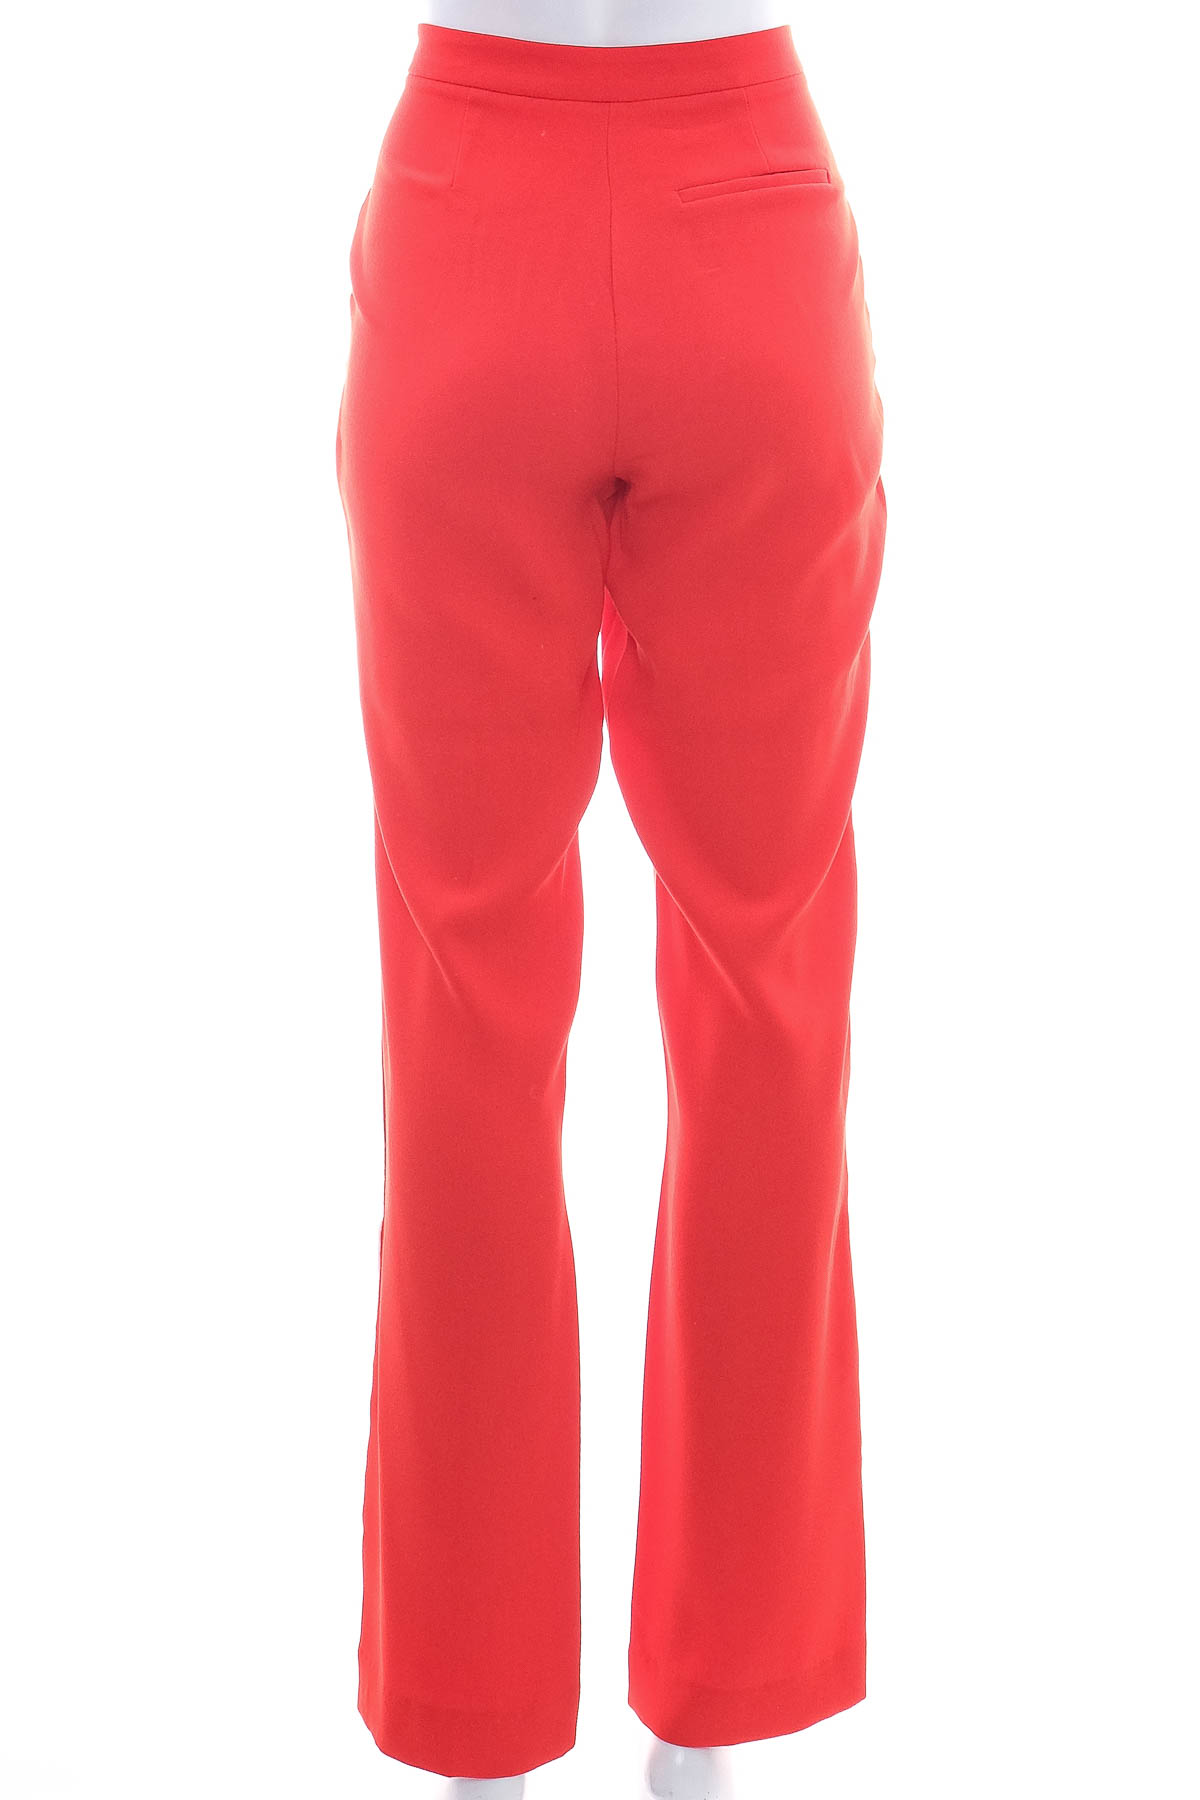 Women's trousers - Someday. - 1